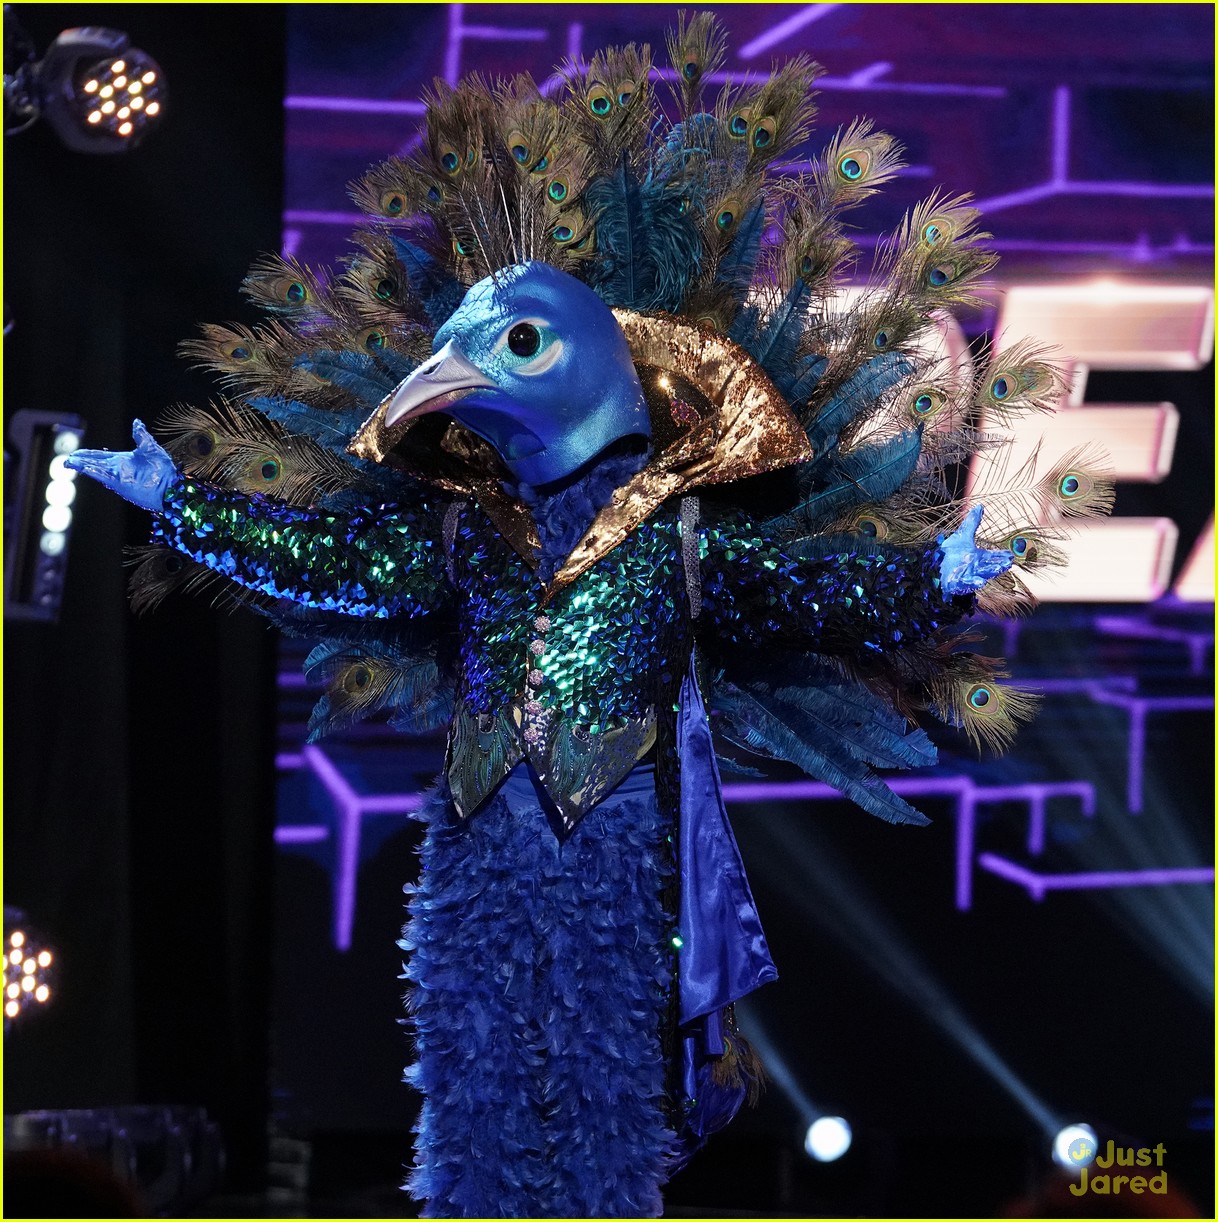 'The Masked Singer' Premieres Tonight Get All The Details About The